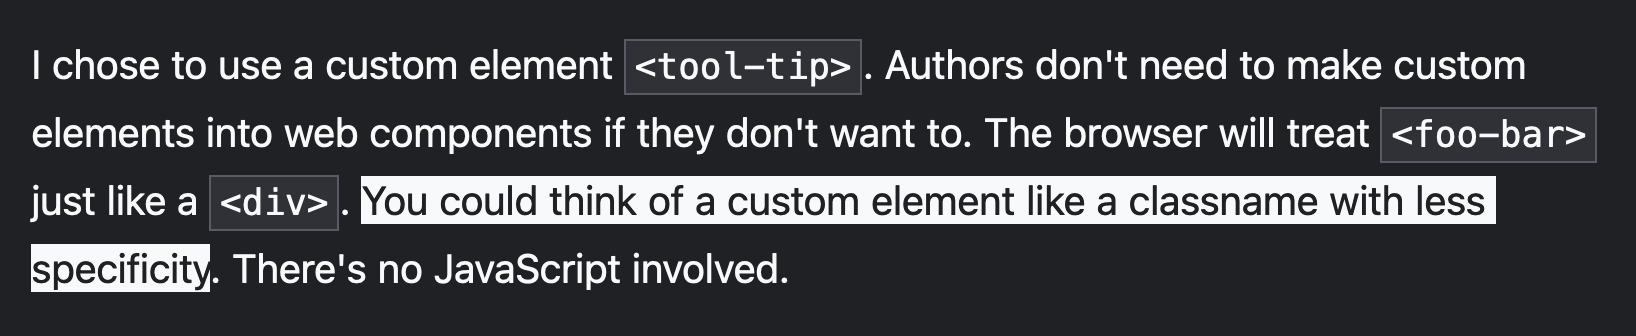 I chose to use a custom element 'tool-tip'. Authors don't need to make custom elements into web components if they don't want to. The browser will treat 'foo-bar' just like a 'div'. You could think of a custom element like a classname with less specificity. There's no JavaScript involved.